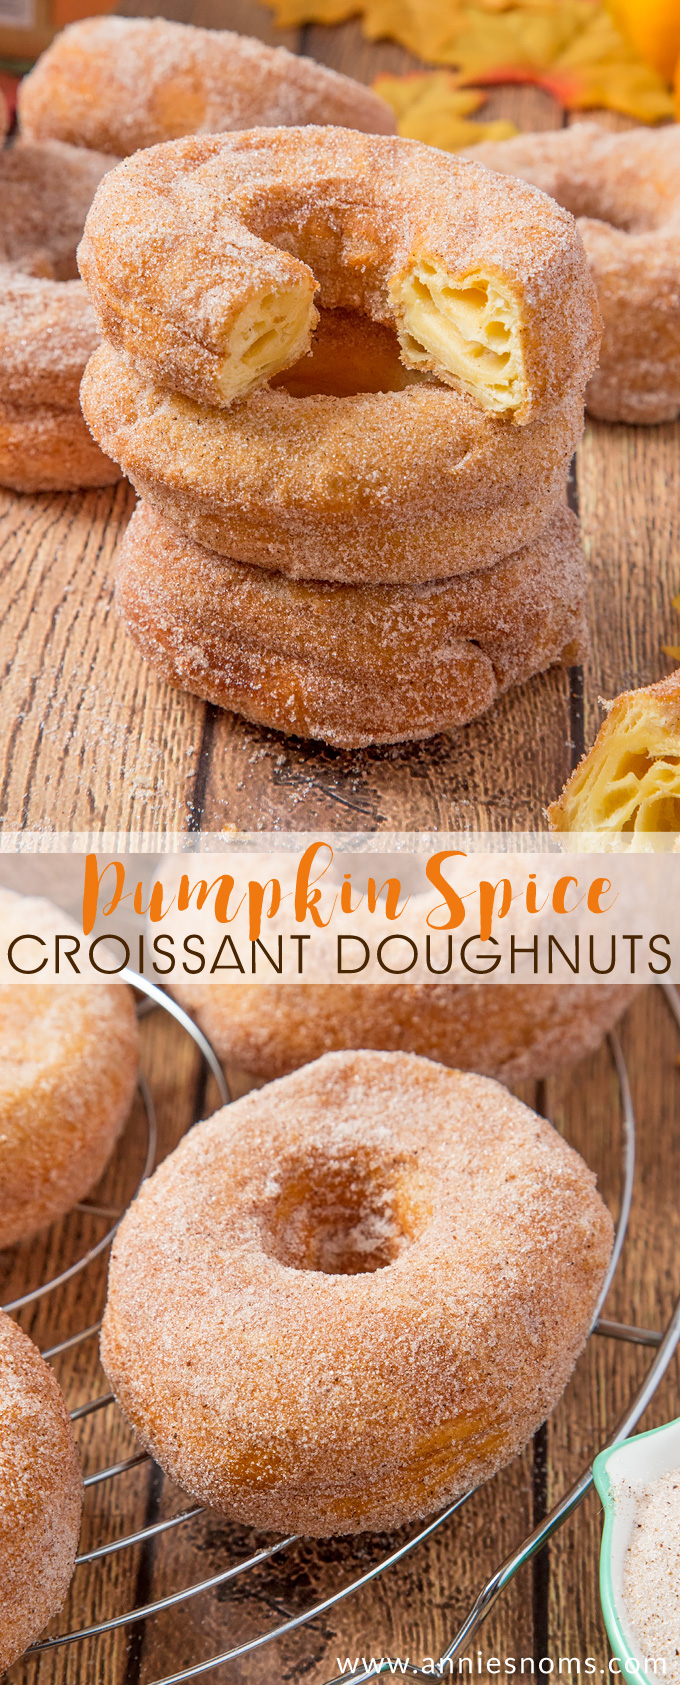 These perfectly golden, flaky Pumpkin Spice Croissant Doughnuts are ridiculously easy to make and utterly divine. Got 30 minutes? Then you have time to make these!